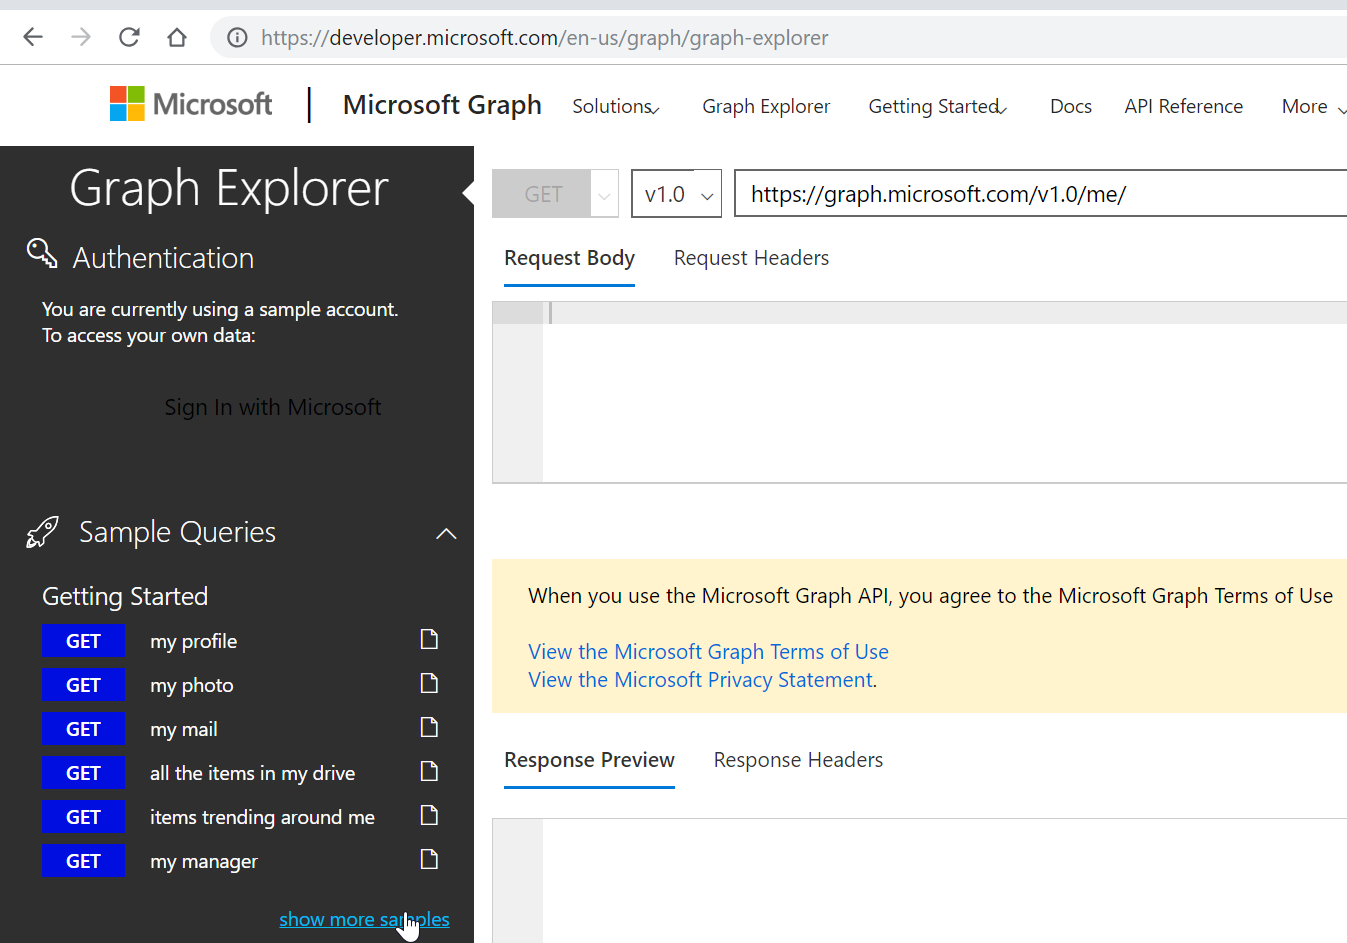 C O https://developer.microsoft.com/en-us/graph/graph-explorer 
Microsoft I Microsoft Graph solutions, Graph Explorer Getting starteæ Docs API Reference 
More 
Graph Explorer 
Authentication 
You are currently using a sample account 
To access your own data: 
ign In with Microsofl 
Sample Queries 
Getting Started 
GET 
GET 
GET 
GET 
GET 
GET 
my profile 
my photo 
my mail 
all the items in my drive 
items trending around me 
my manager 
https://graph.microsoft.com/vl.0/me/ 
VI.o v 
Request Body Request Headers 
When you use the Microsoft Graph API, you agree to the Microsoft Graph Terms of use 
View the Microsoft Graph Terms of Use 
View the Microsoft Privacy Statement 
Response Preview Response Headers 